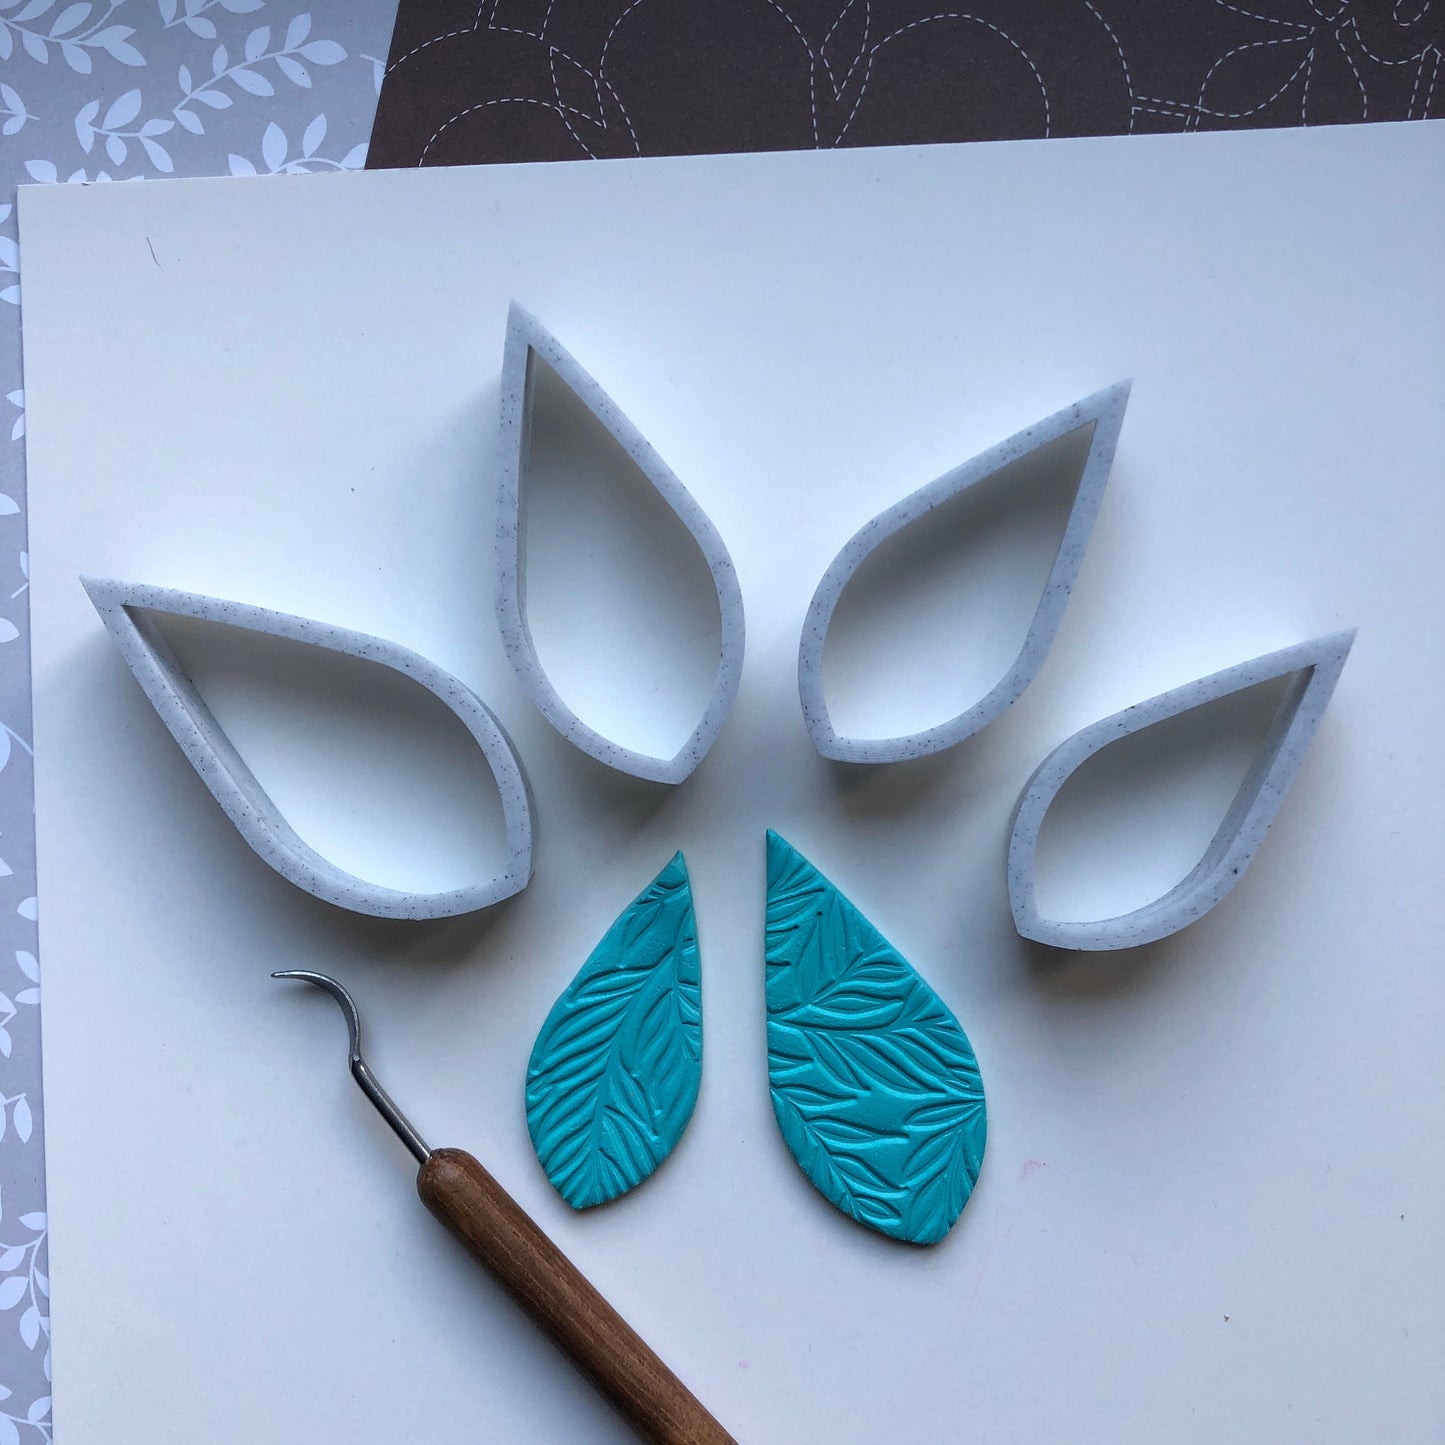 Leaf shape cutter set - made for use with polymer clay